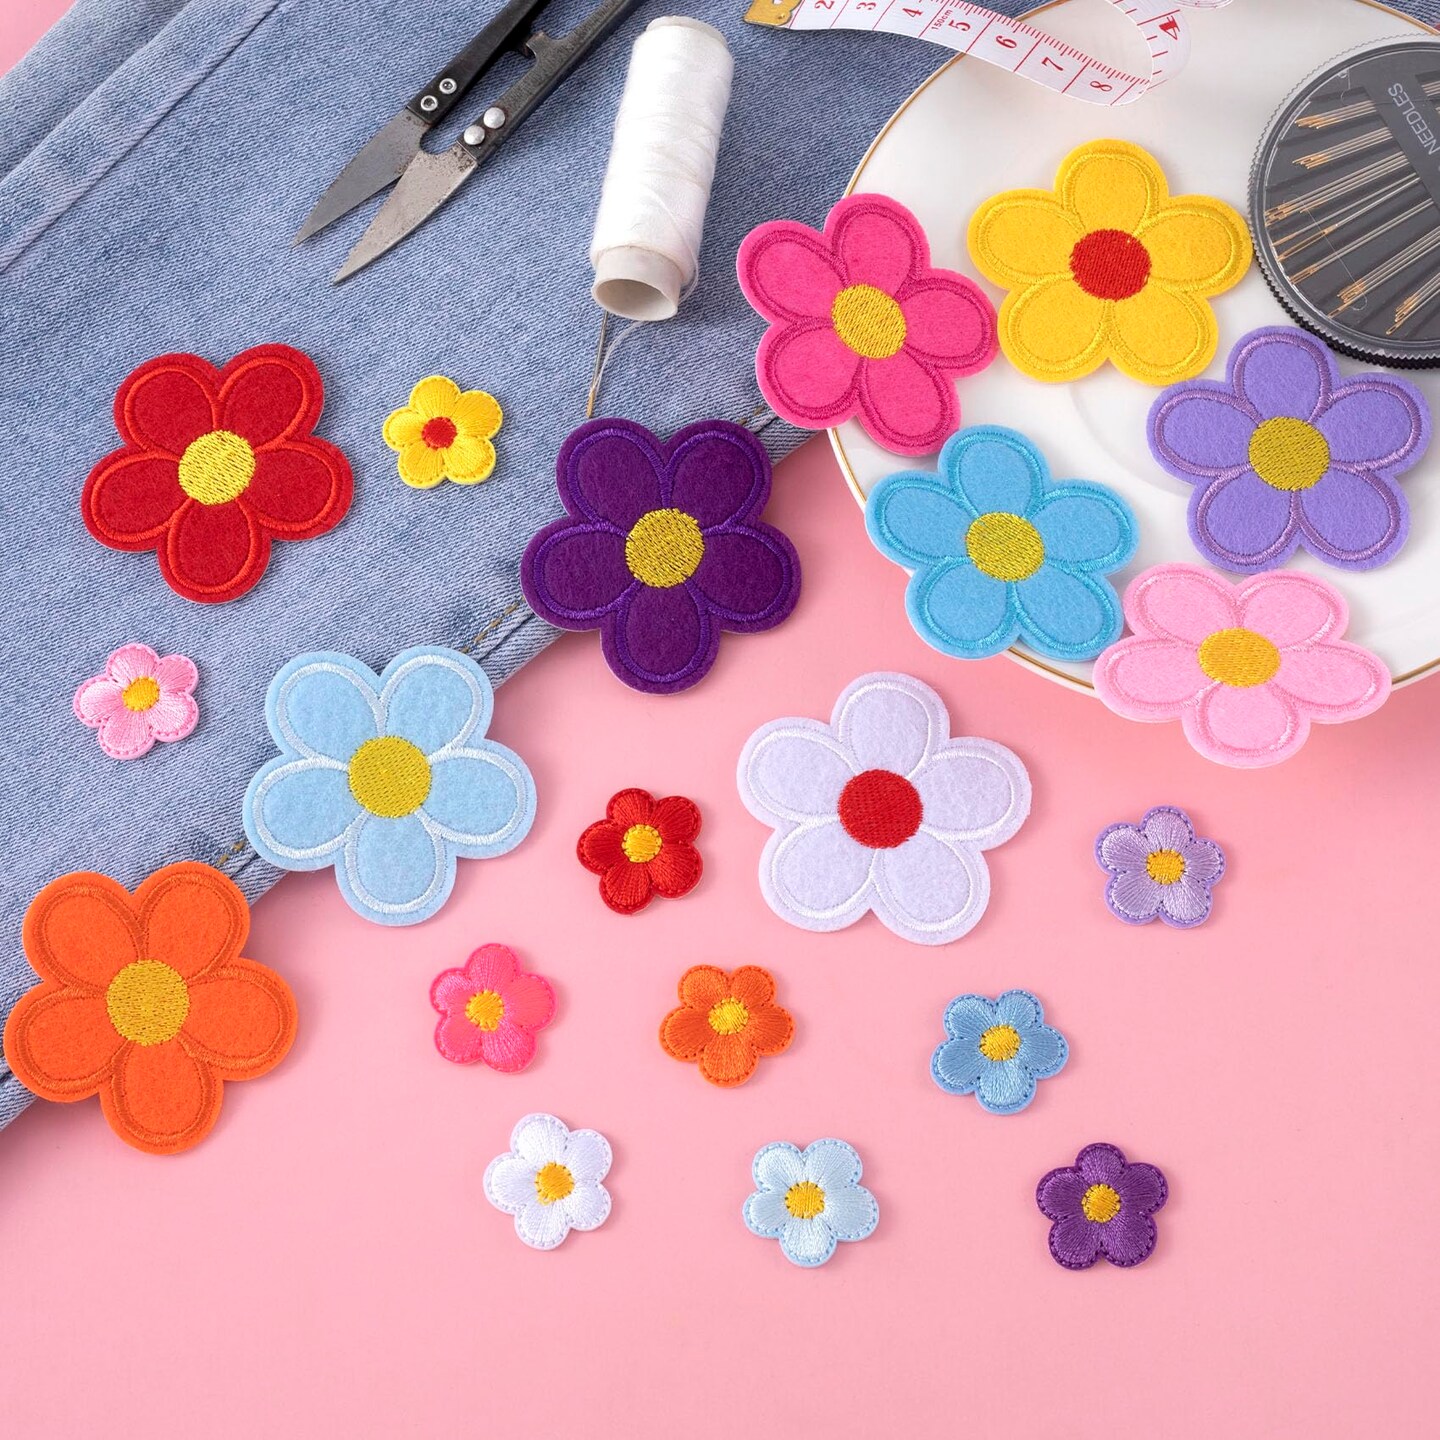 PAGOW 20 Pcs Cute Flower Iron on Patches, 5 Petals Flower Applique Patch, Small Sew On Embroidered Applique Sewing Patches for Backpacks, Bags, Jackets, Jeans, Clothes (2 Sizes, 20 Colors)